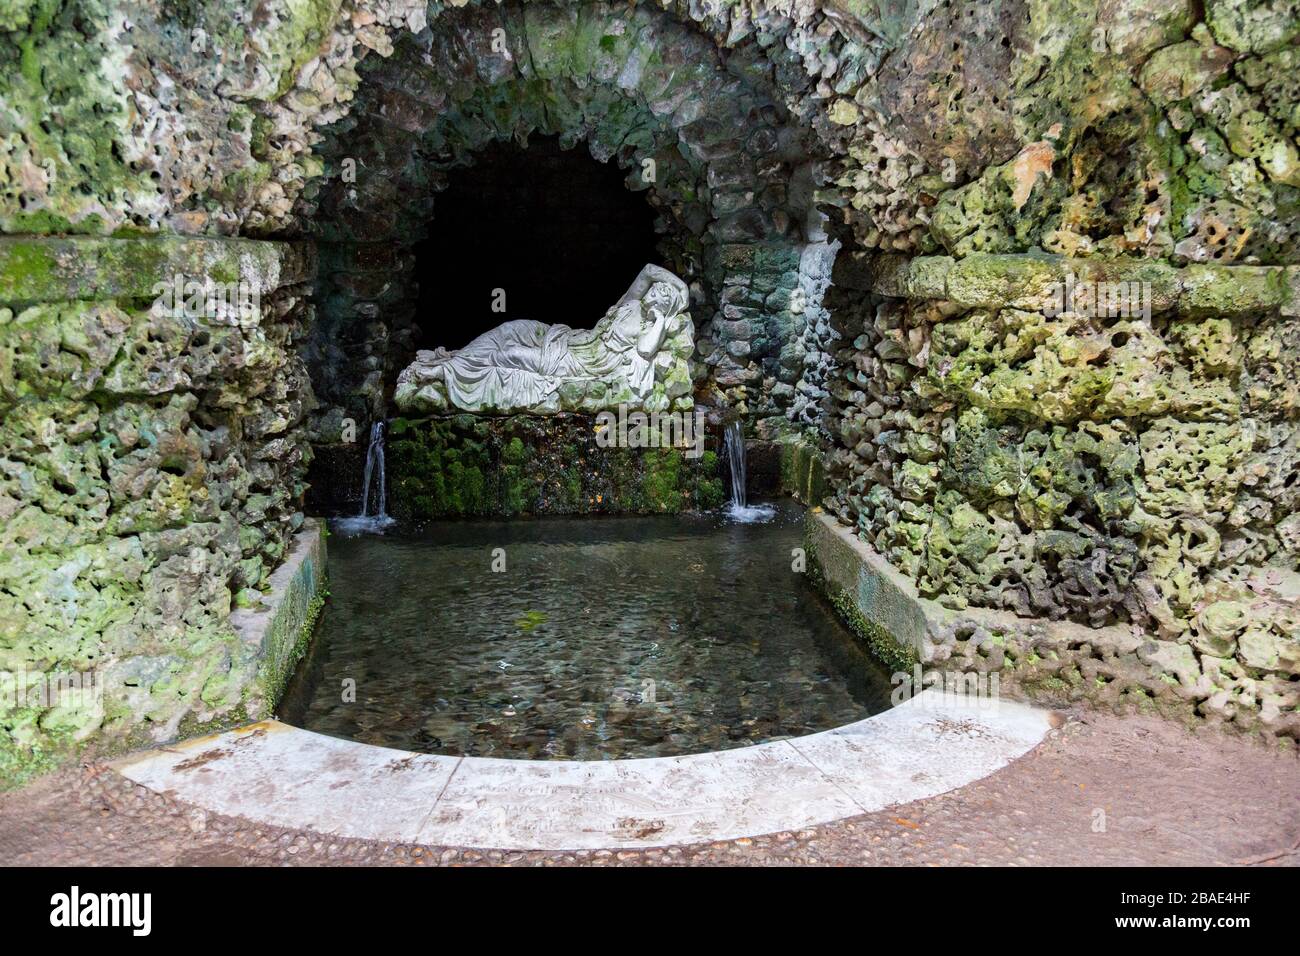 The sleeping nymph statue by John Cheere in the Grotto at Stourhead Gardens, Wiltshire, England, UK Stock Photo